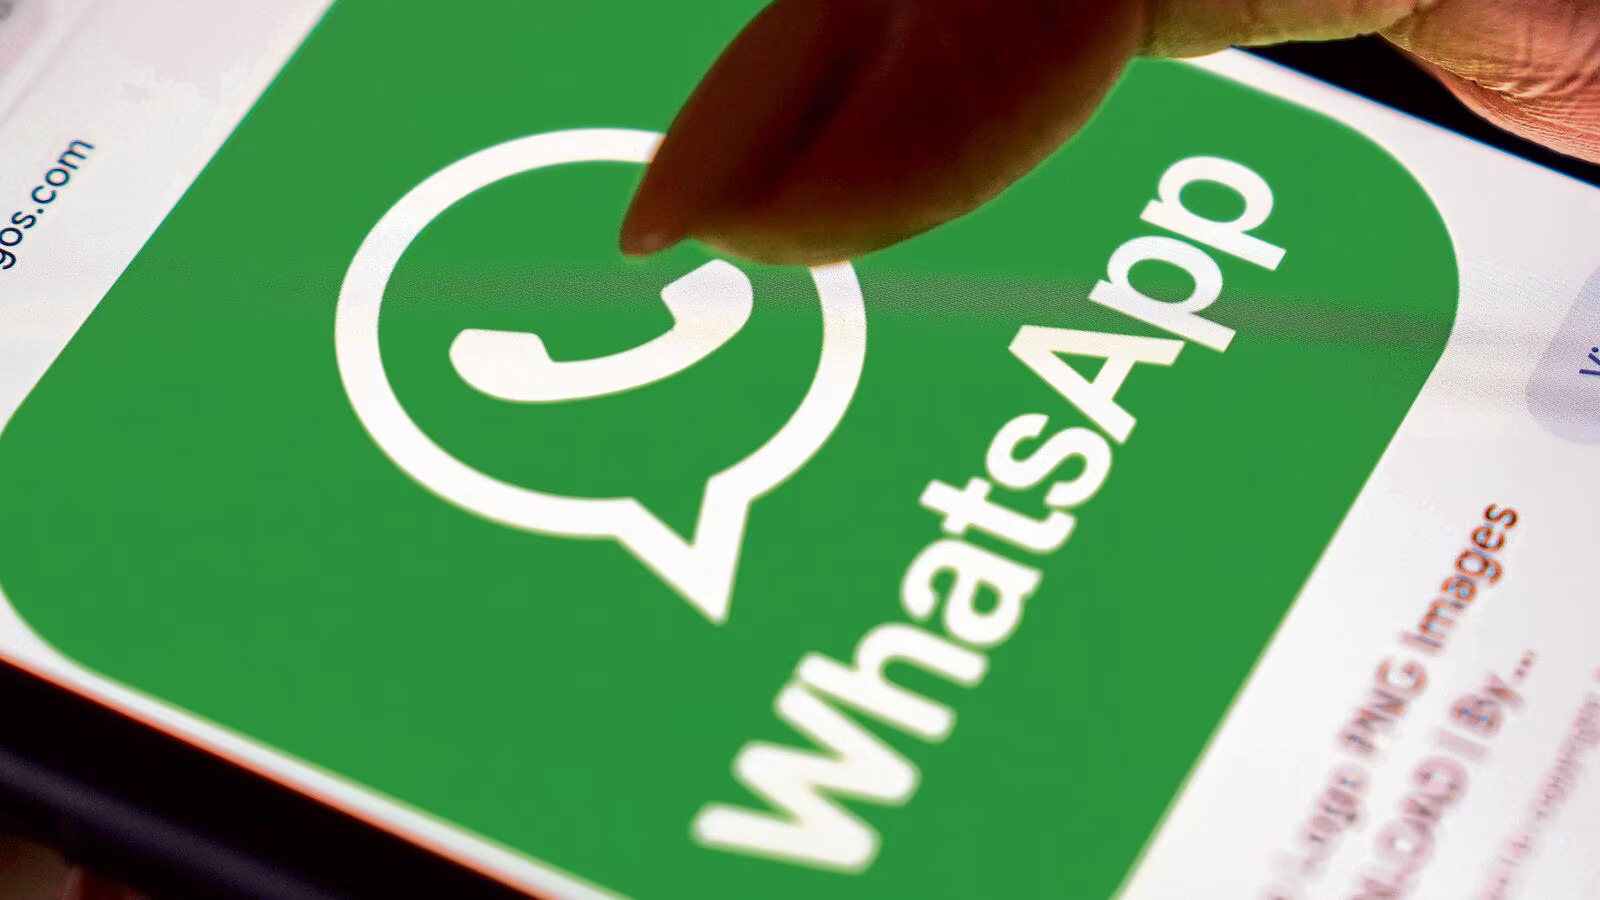 WhatsApp Rolls Out Testing for New ‘Recently Active’ Contacts Feature